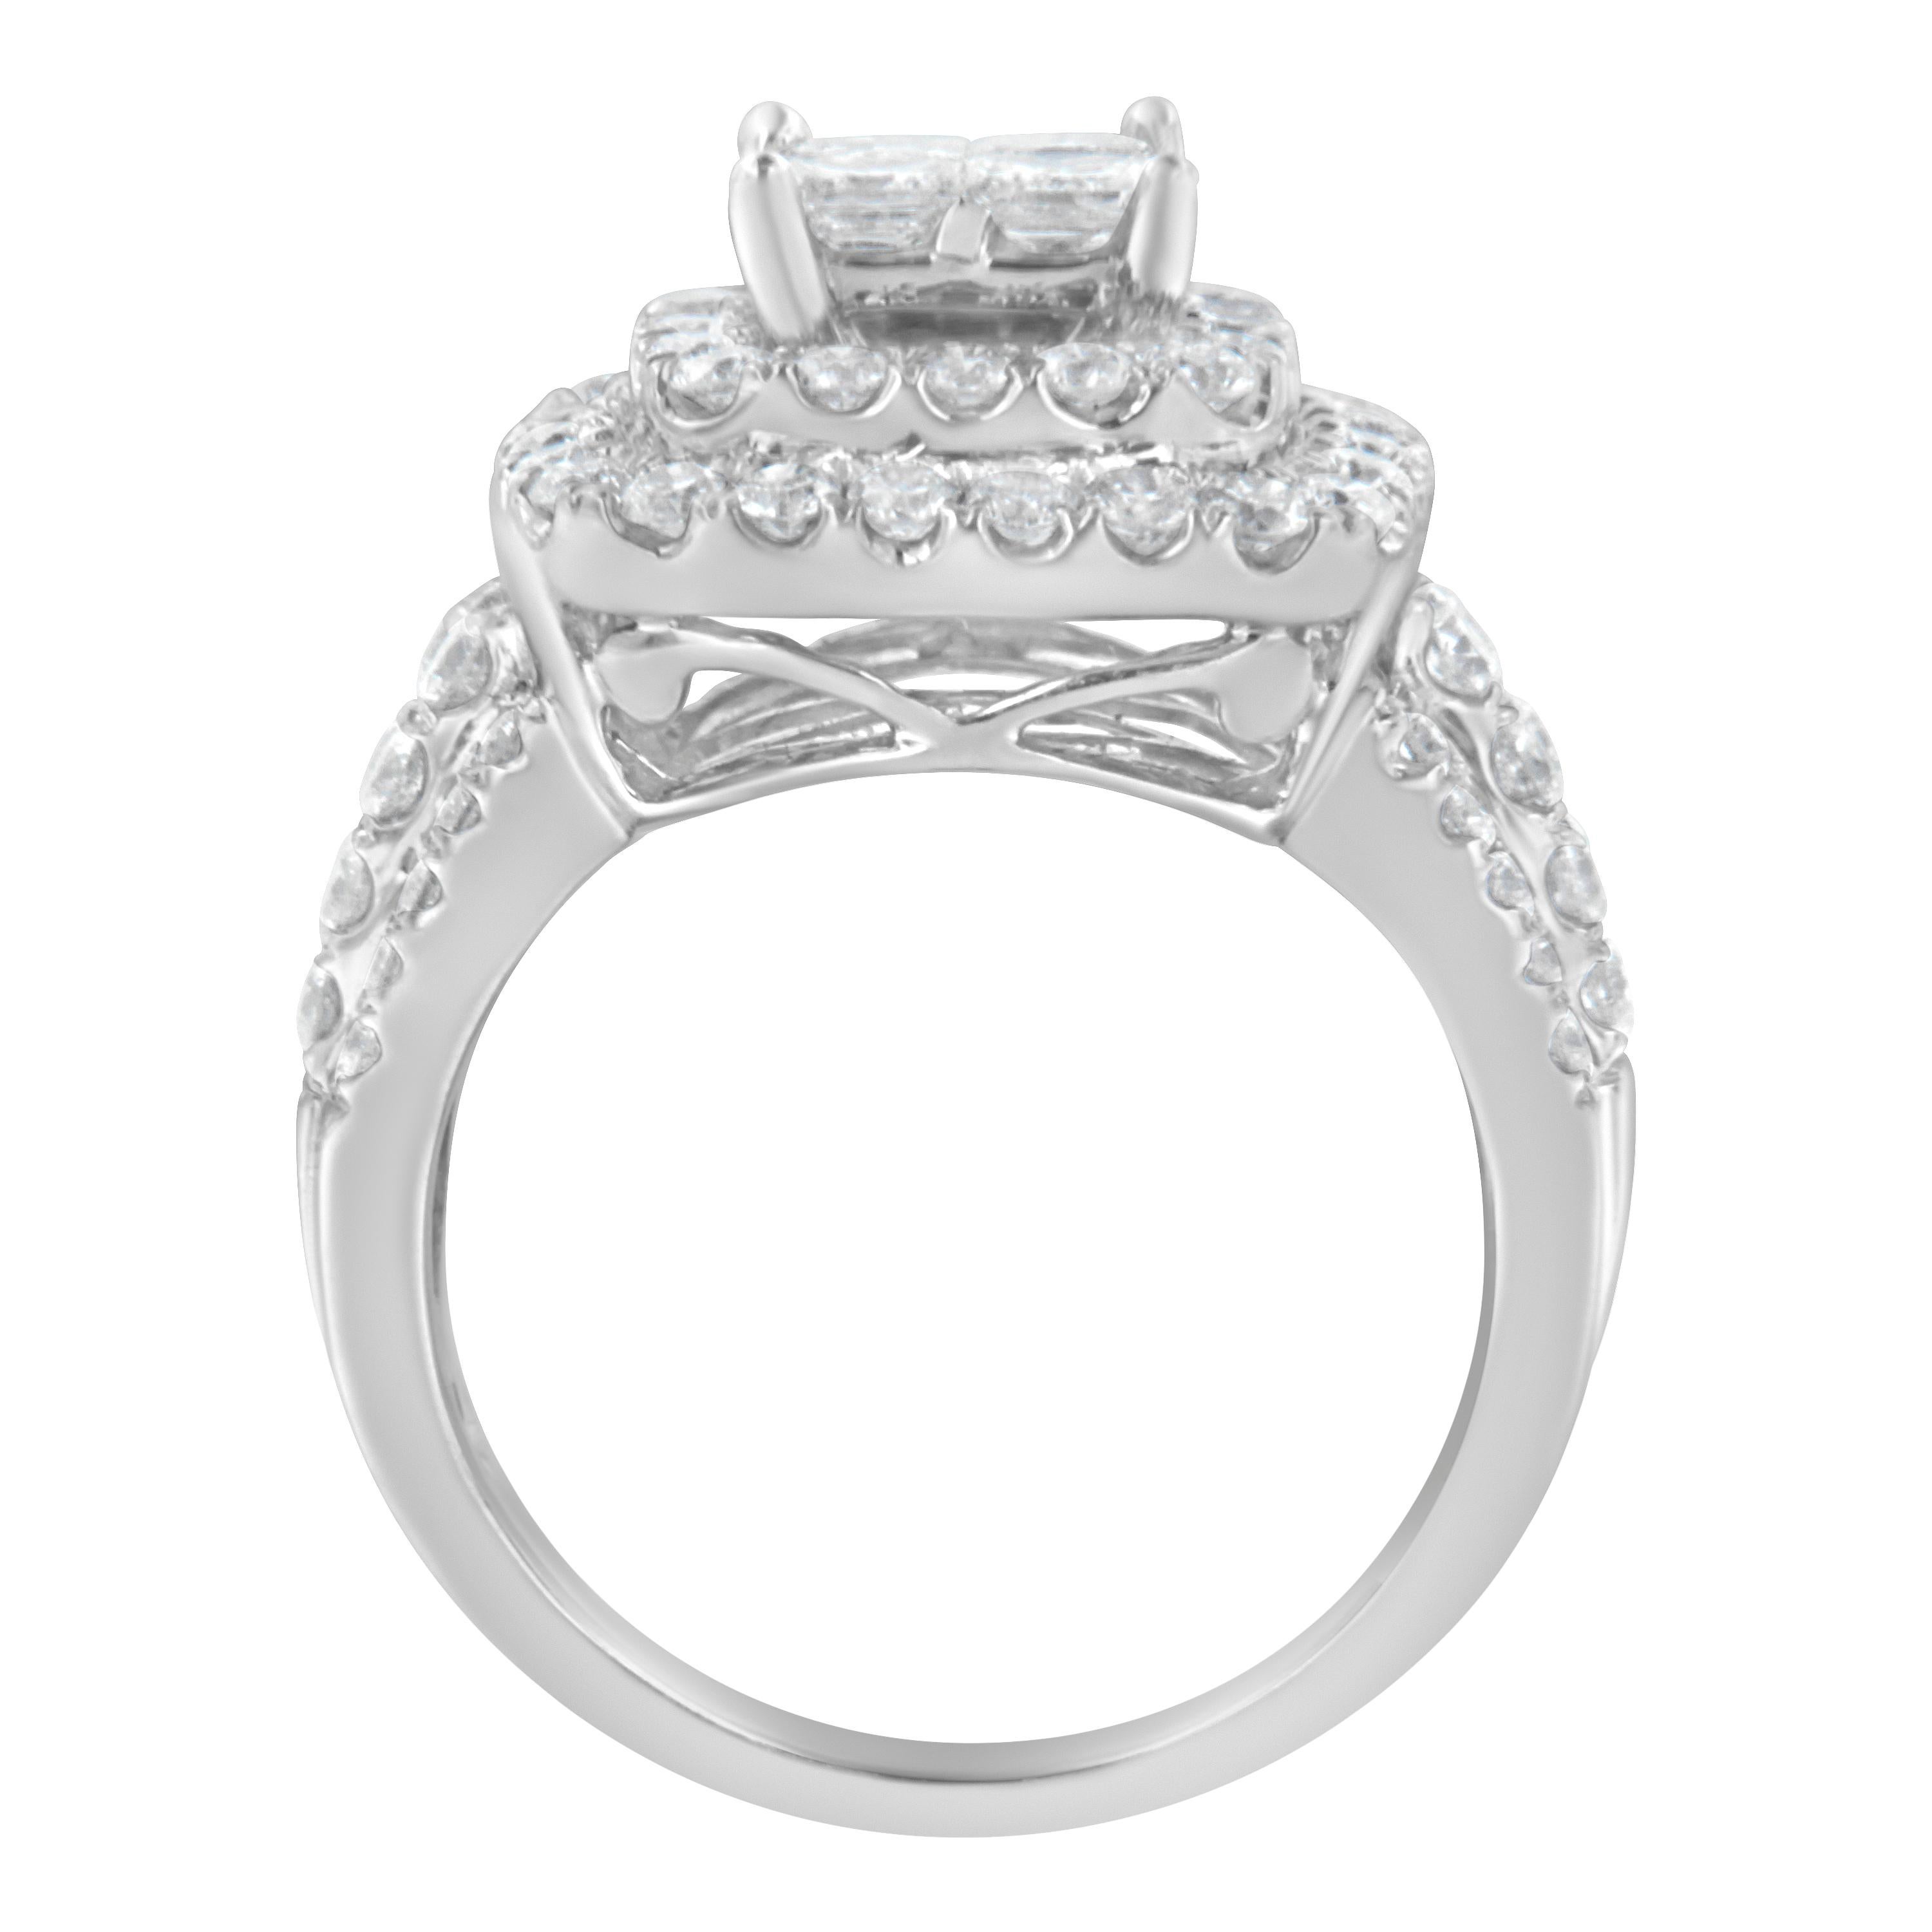 A diamond cocktail ring that sparkles with a central square cluster of princess cut diamonds surrounded by a double halo of round diamonds. The wide band is crafted in 14 karat white gold and has four rows of round diamonds. It has a total diamonds